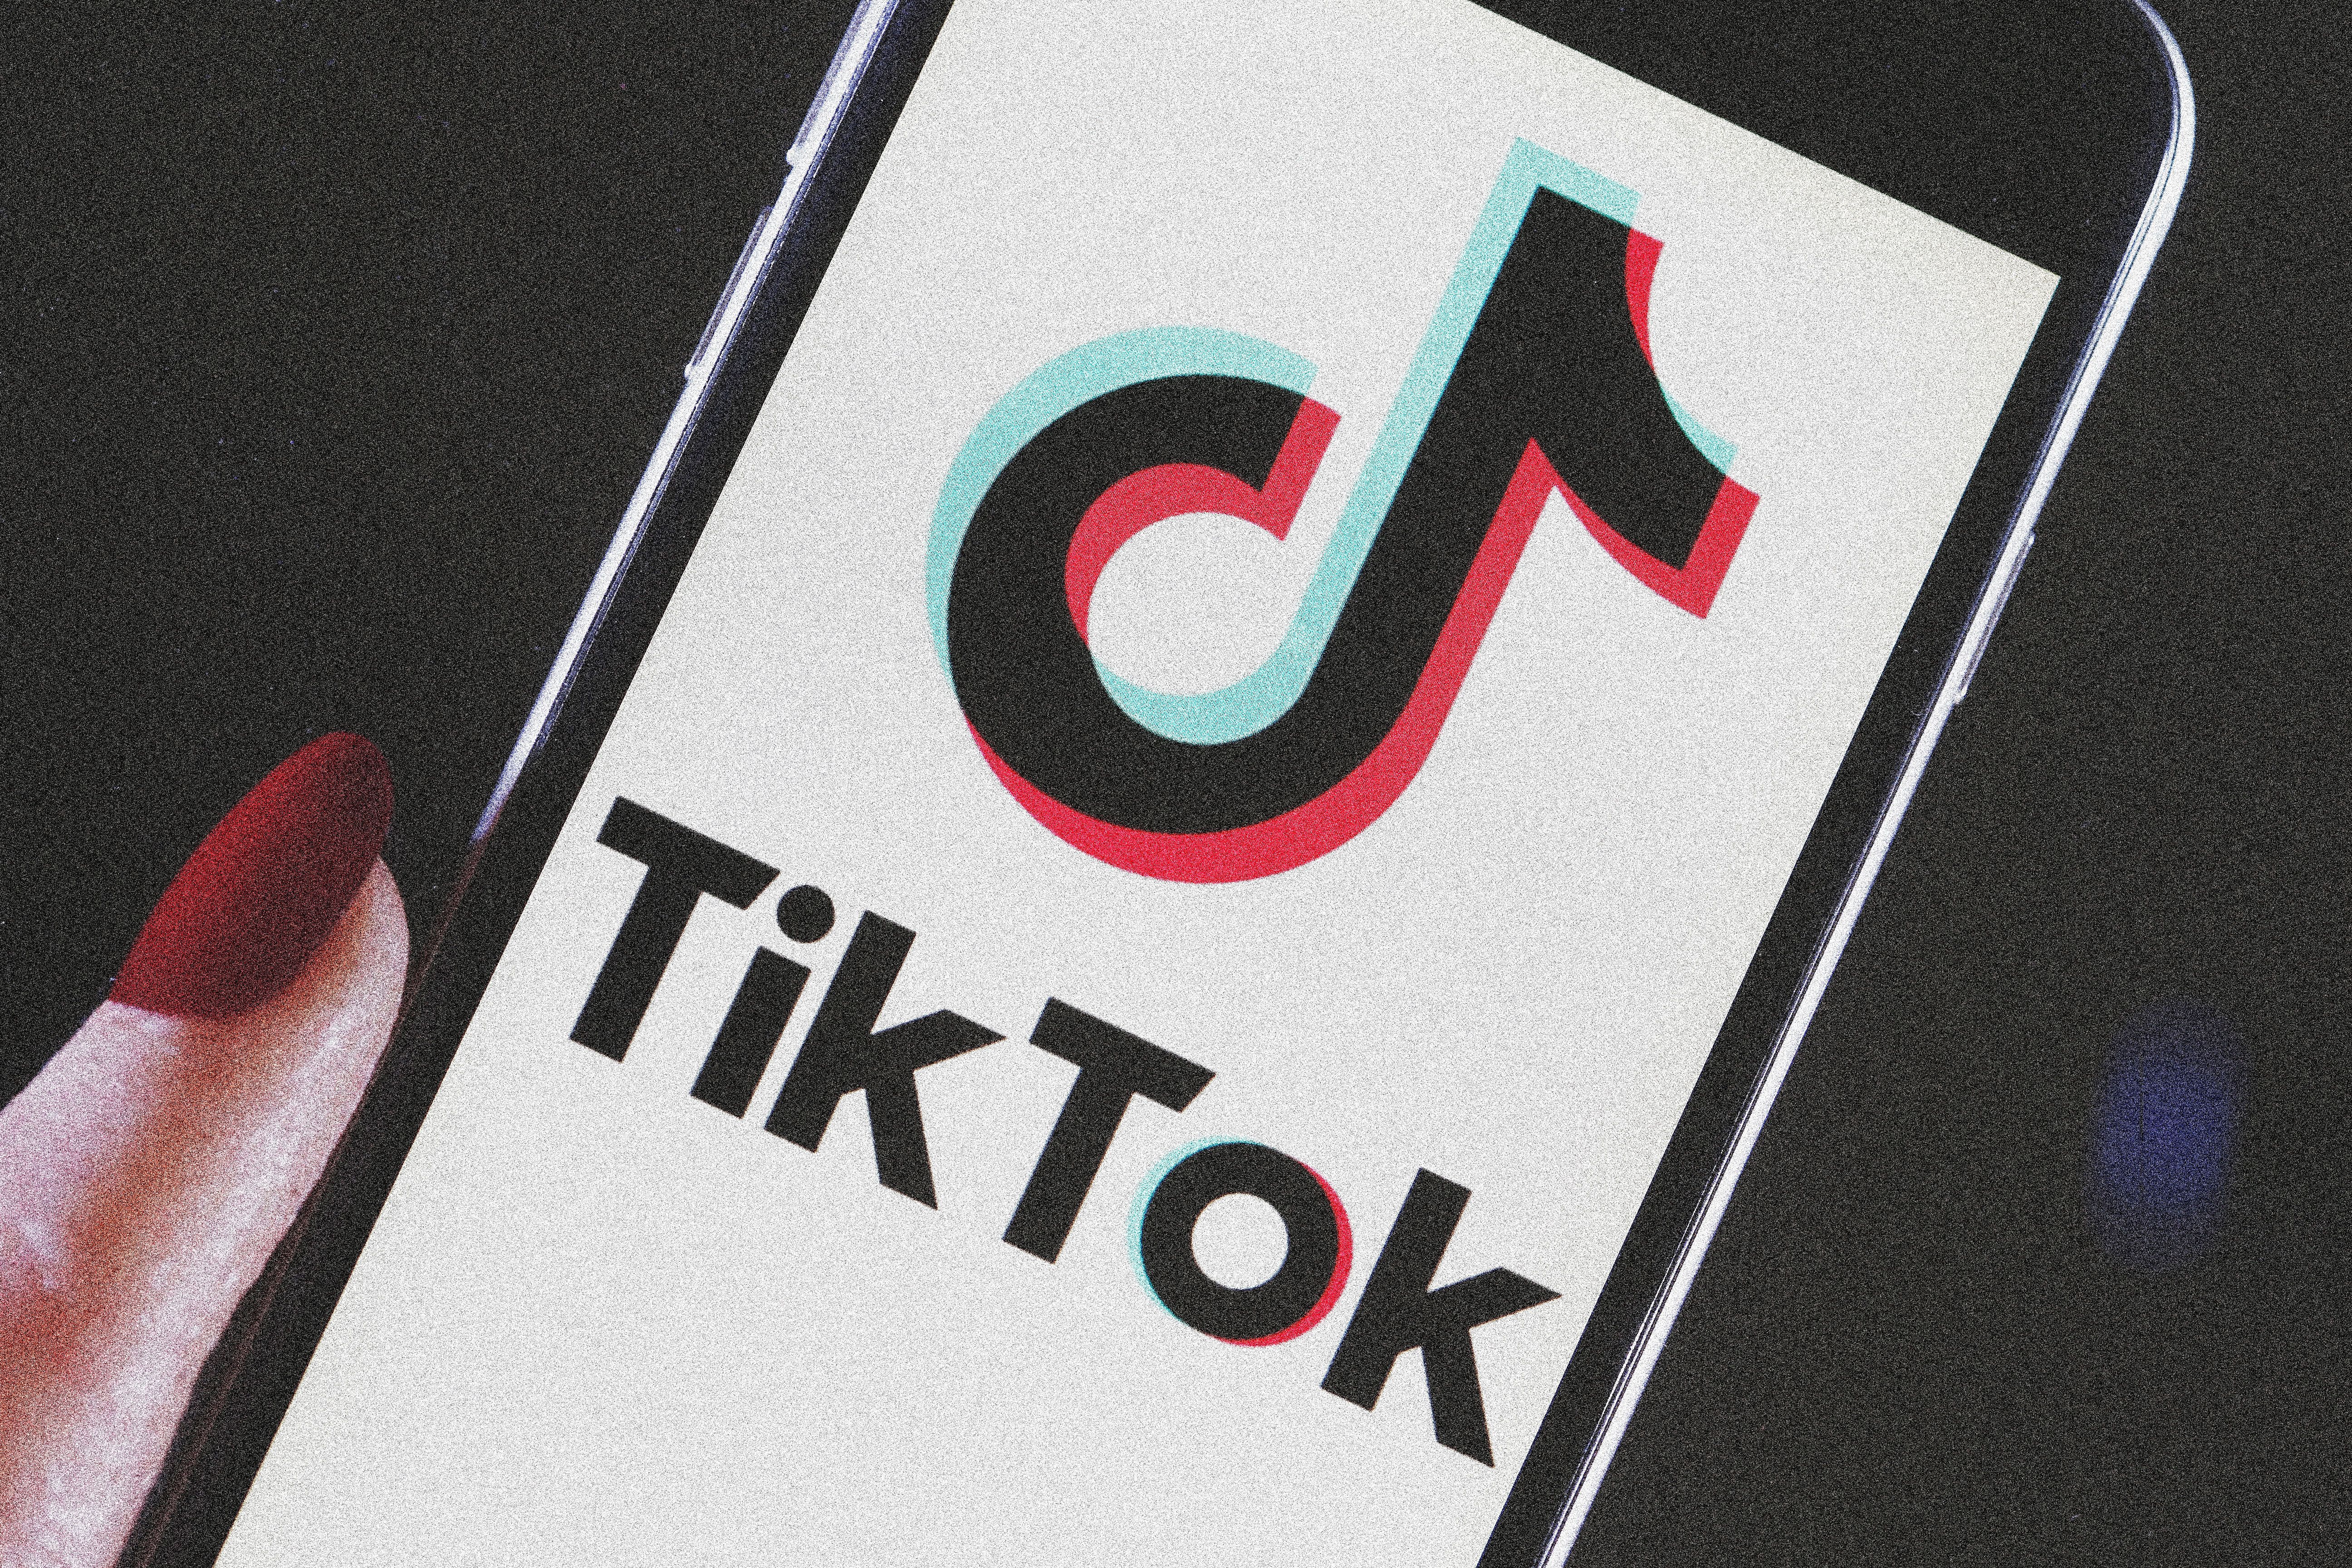 Howbto join your private server in project mugestu｜TikTok Search